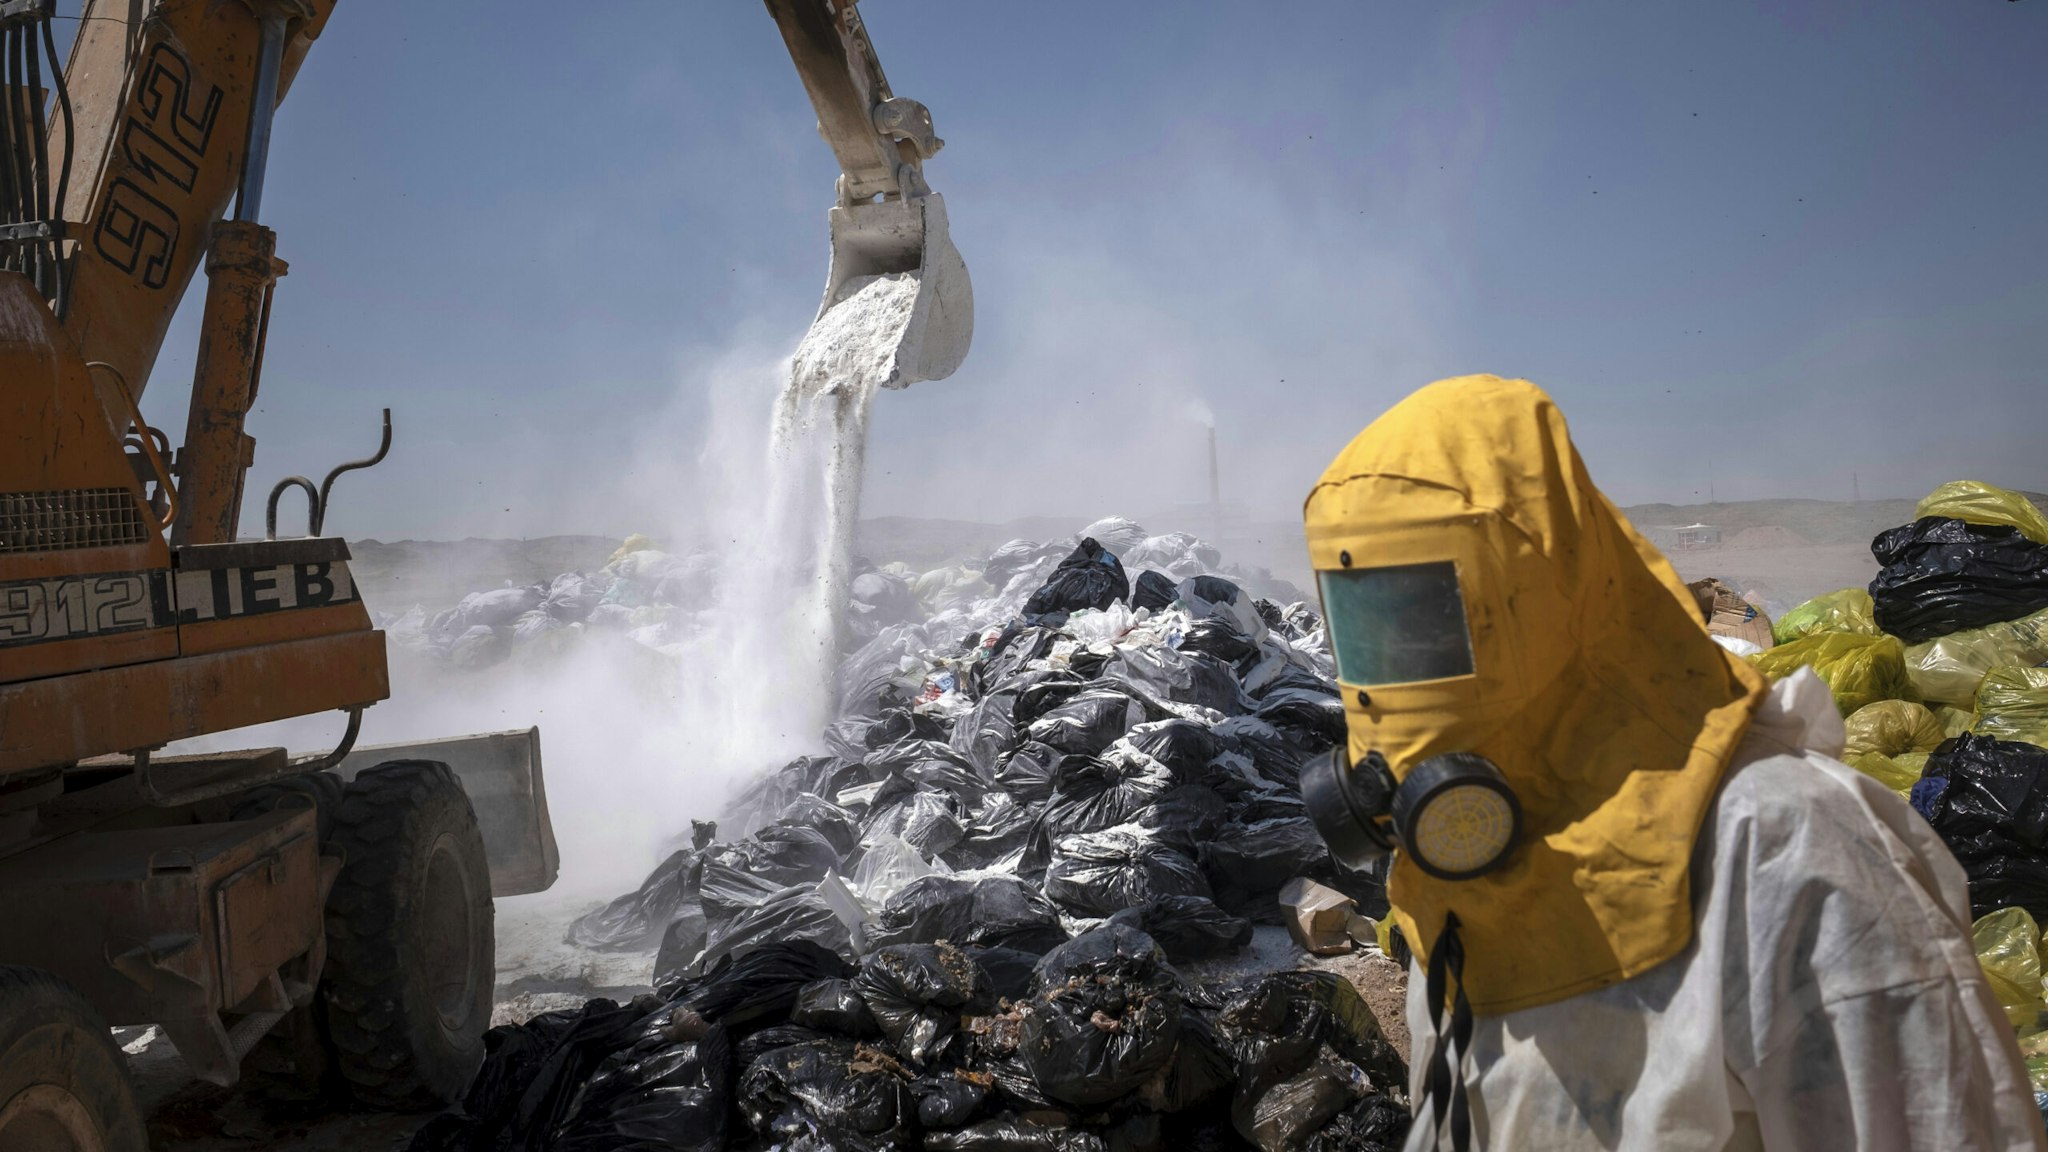 An Iranian worker wearing a protective suit as a loader covers infectious wastes with lime in Tehran Garbage Disposal Center, following the new coronavirus disease (COVID-19) outbreak in Iran, June 7, 2020.